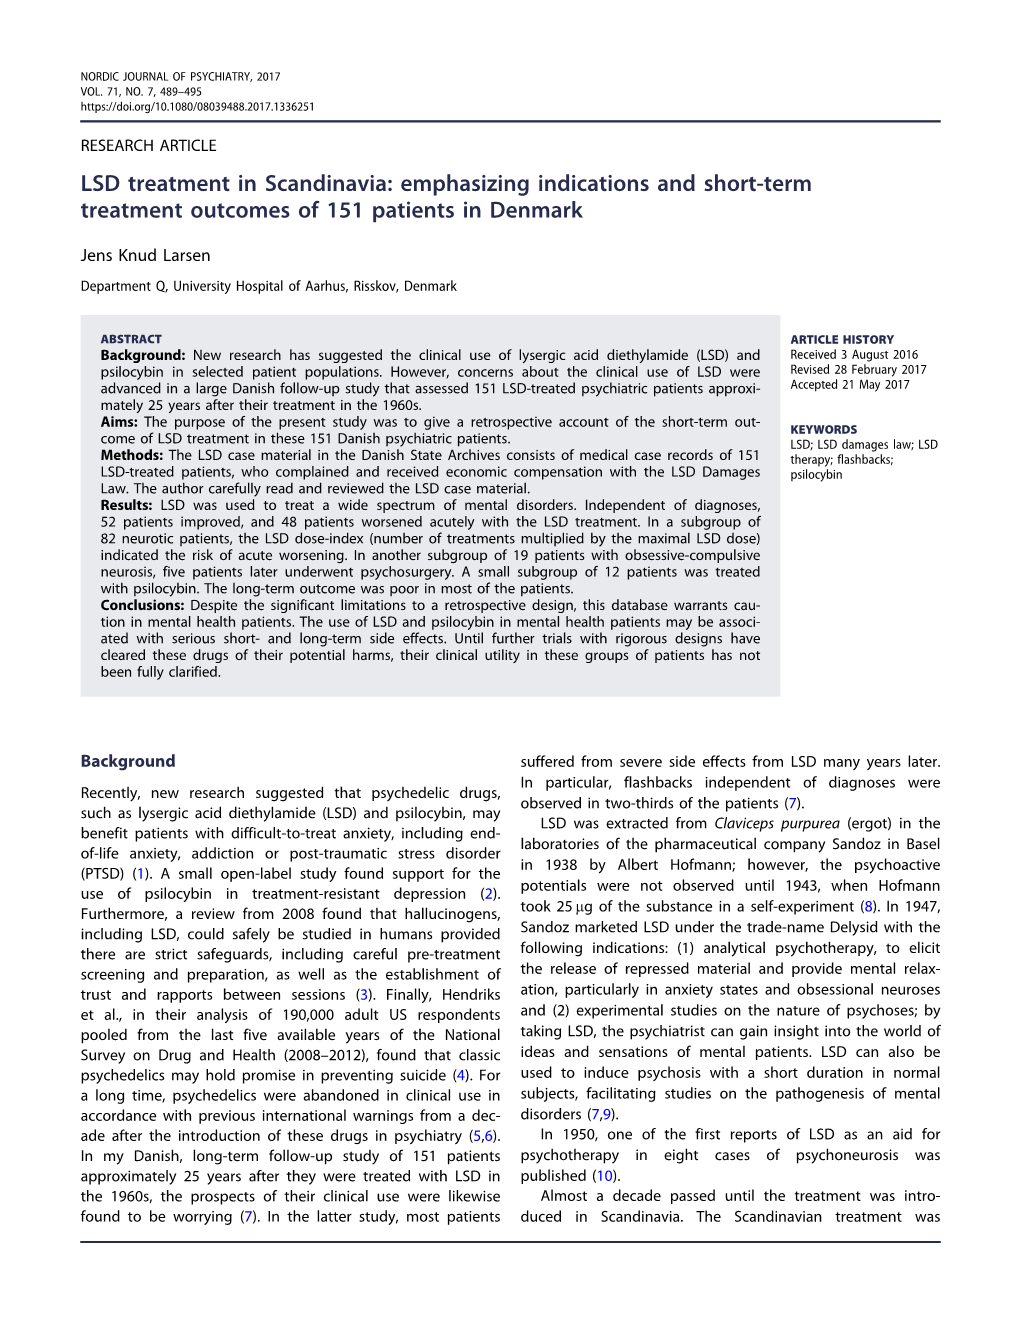 LSD Treatment in Scandinavia: Emphasizing Indications and Short-Term Treatment Outcomes of 151 Patients in Denmark